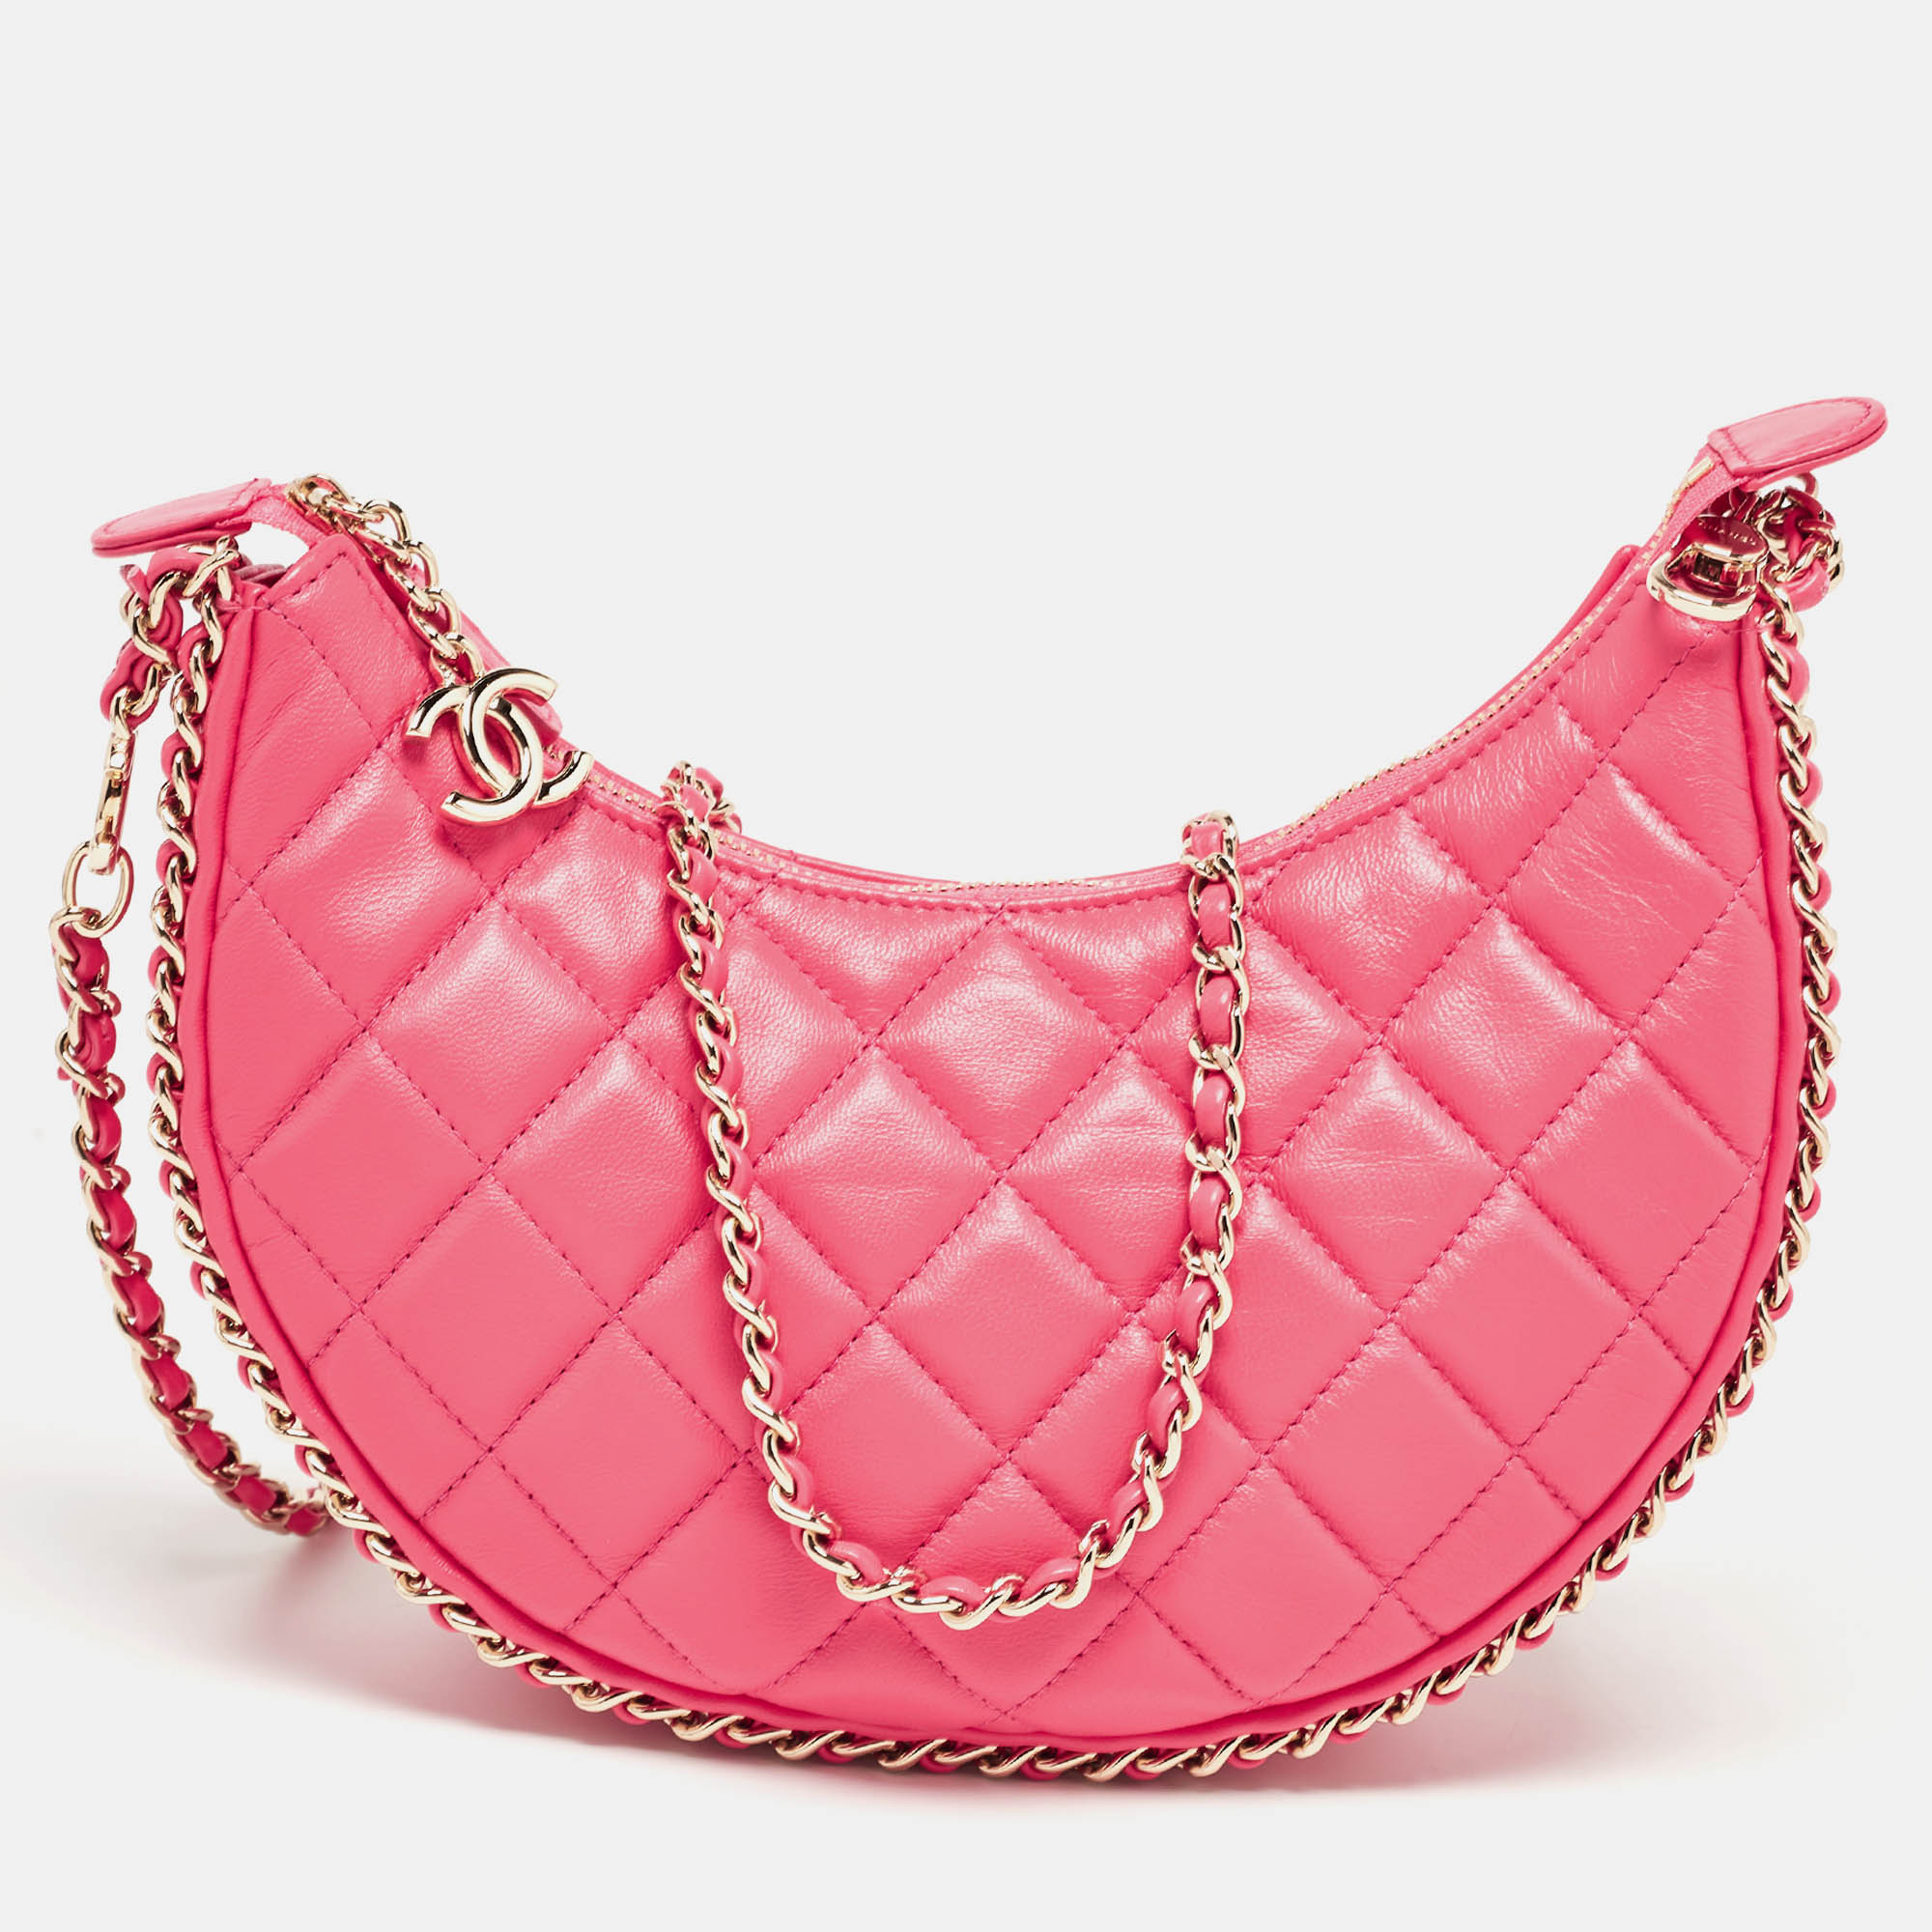 Pre-owned Chanel Pink Quilted Leather Cc Moon Bag